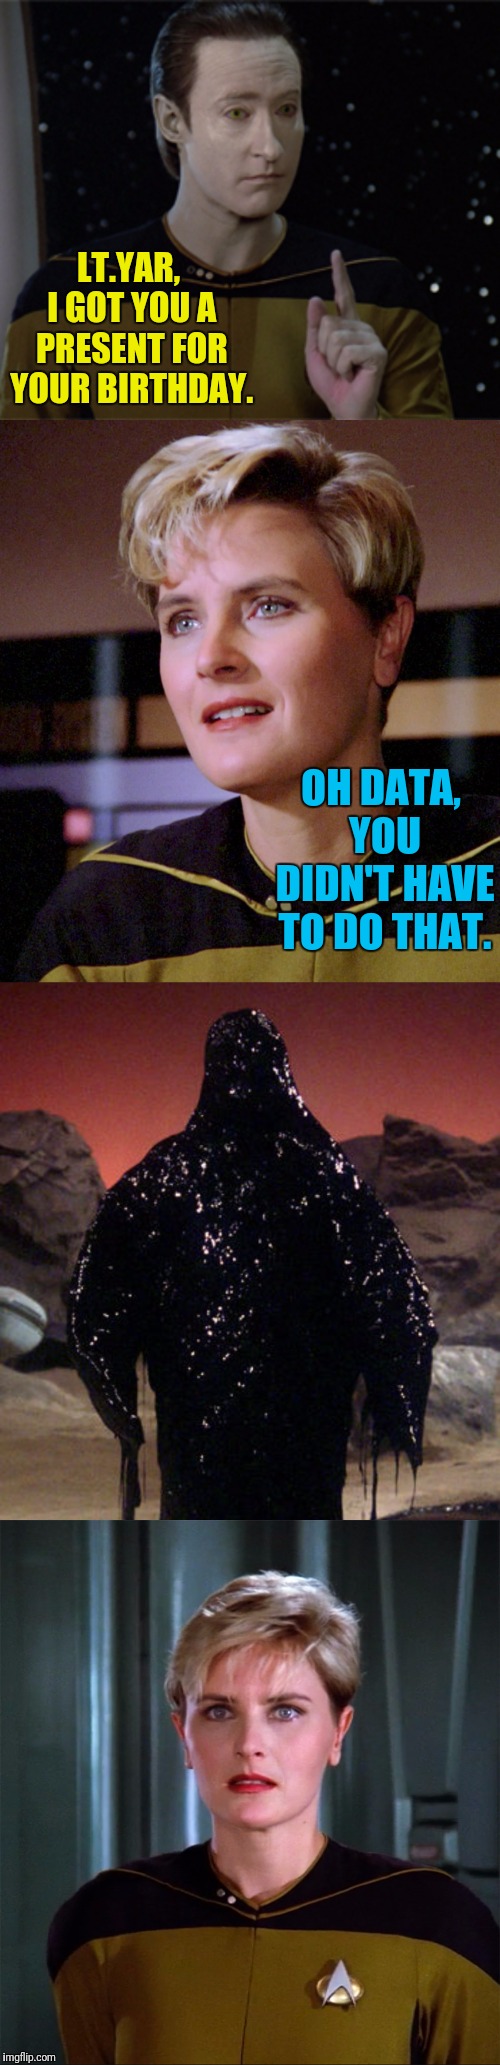 Birthday Tar | LT.YAR, I GOT YOU A PRESENT FOR YOUR BIRTHDAY. OH DATA, YOU DIDN'T HAVE TO DO THAT. | image tagged in star trek the next generation,star trek data,data | made w/ Imgflip meme maker